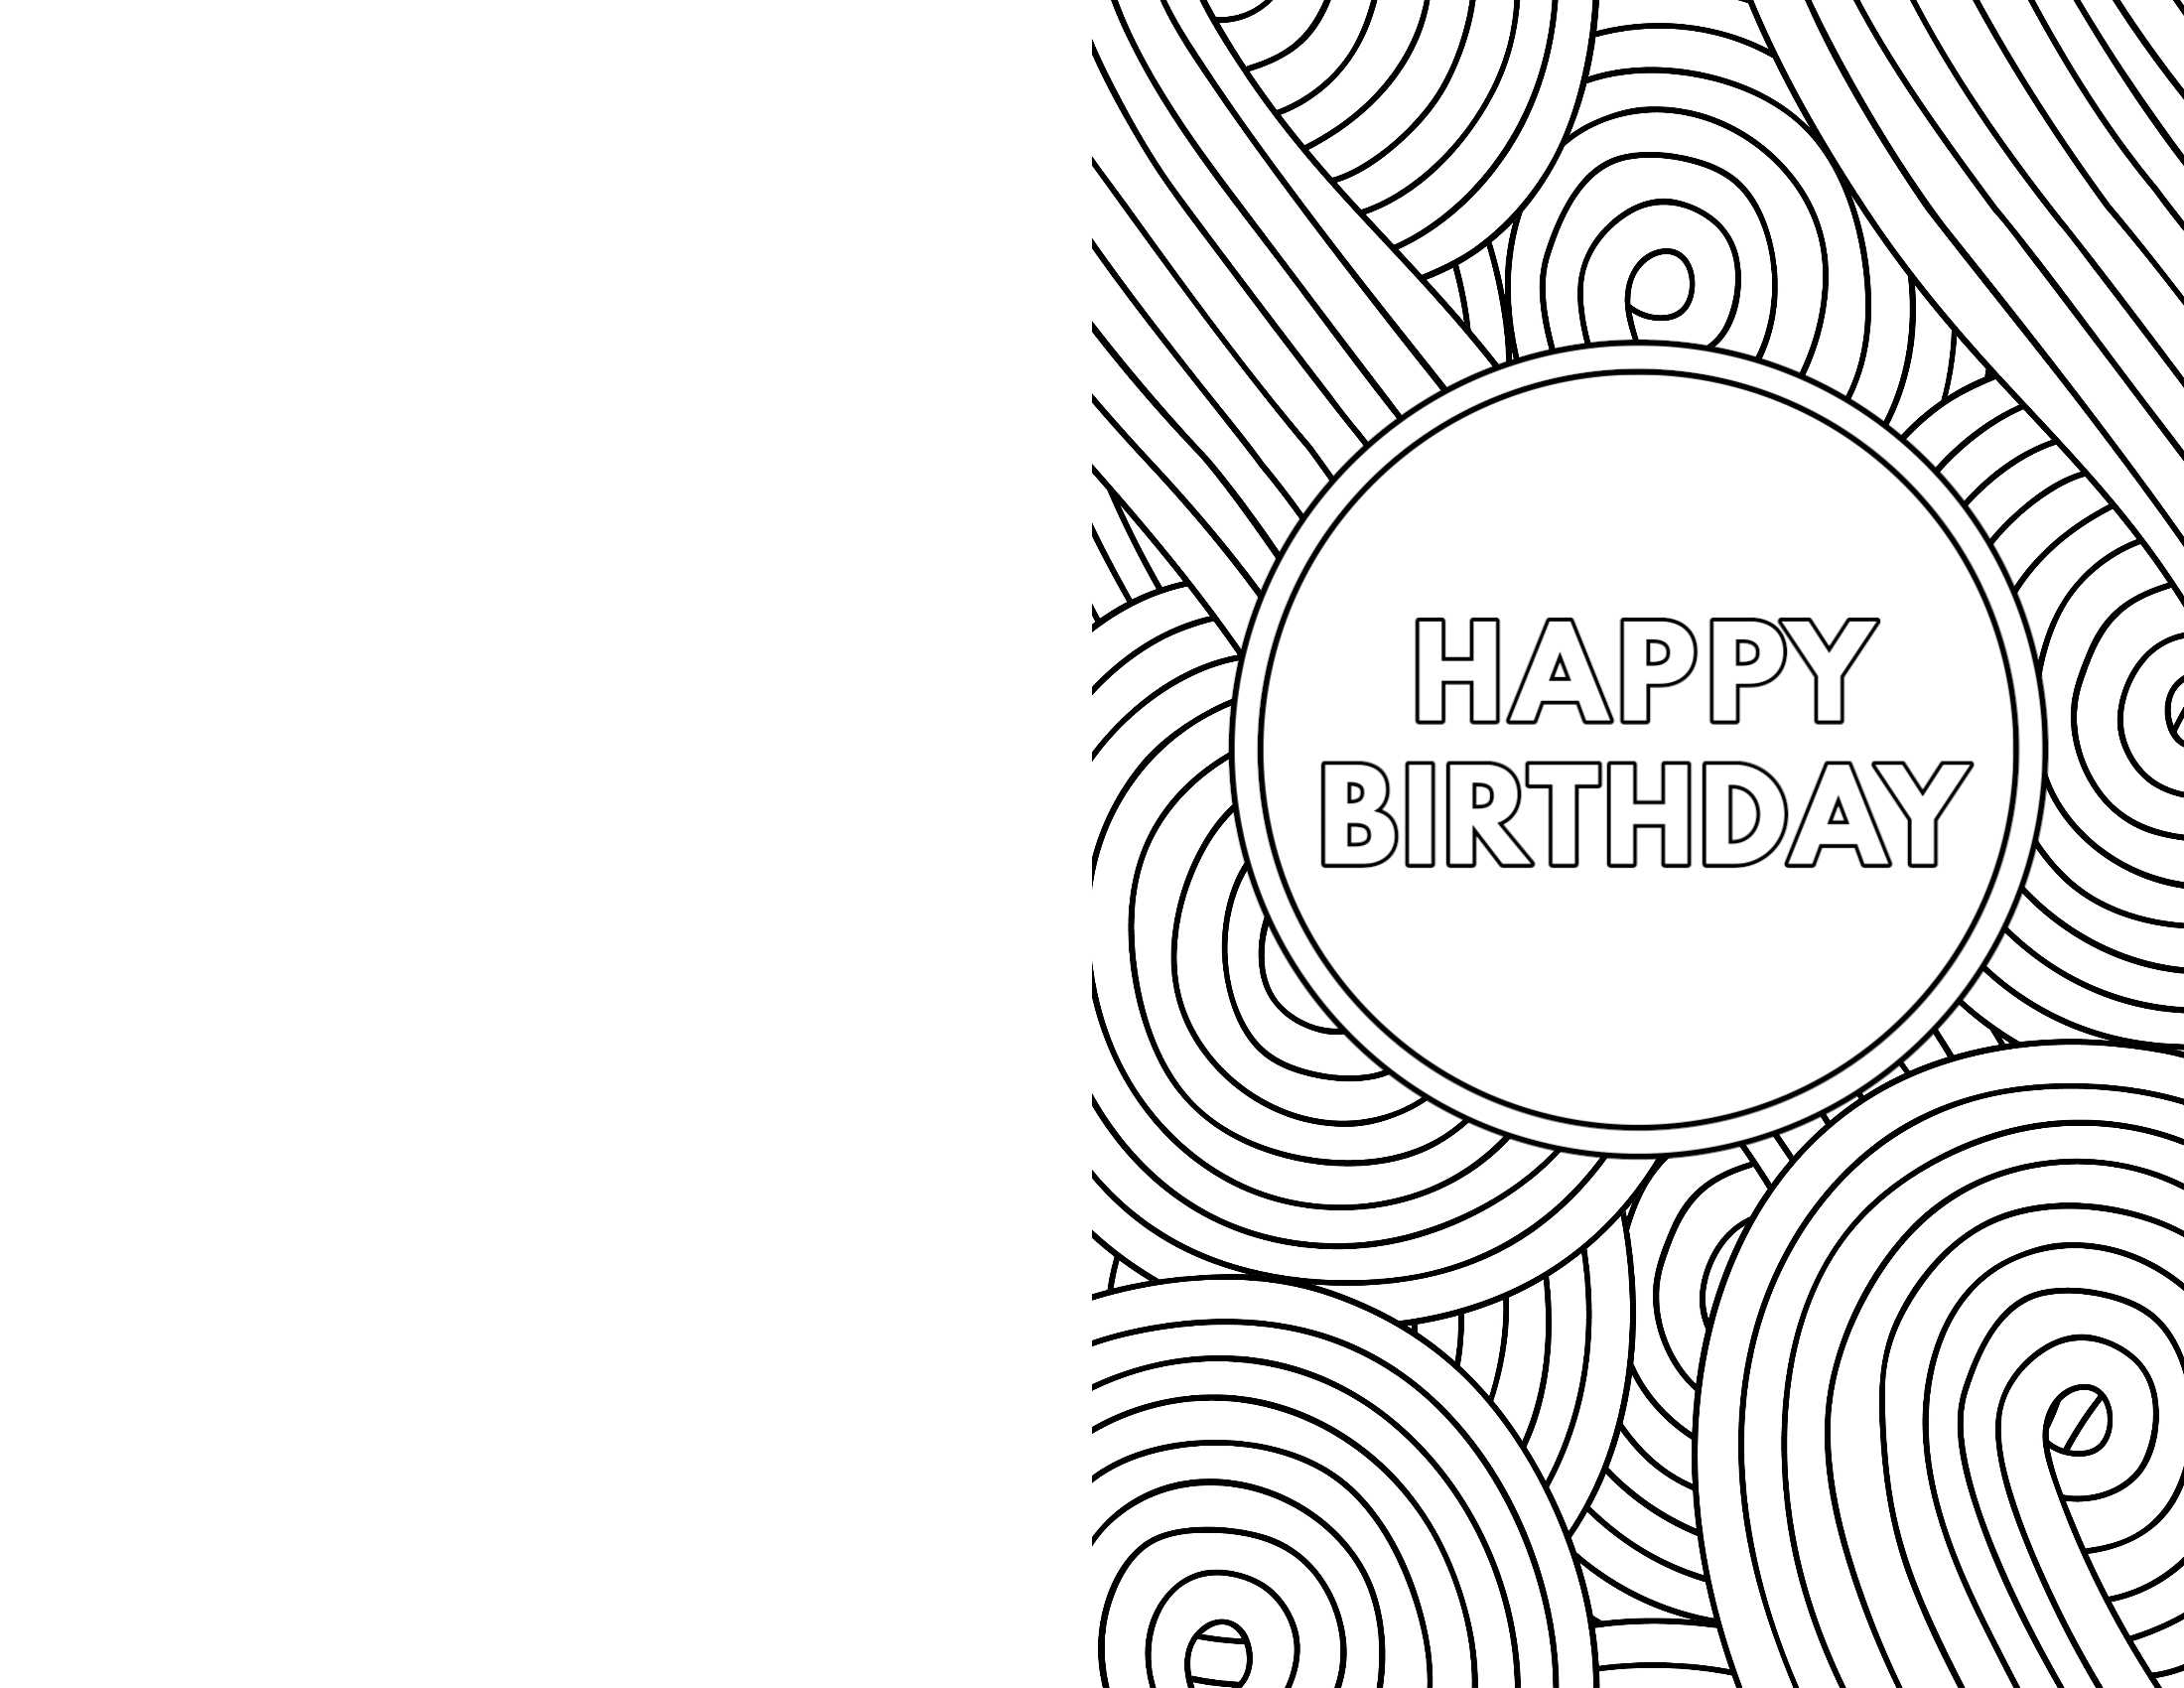 Free Printable Birthday Cards – Paper Trail Design Throughout Foldable Birthday Card Template